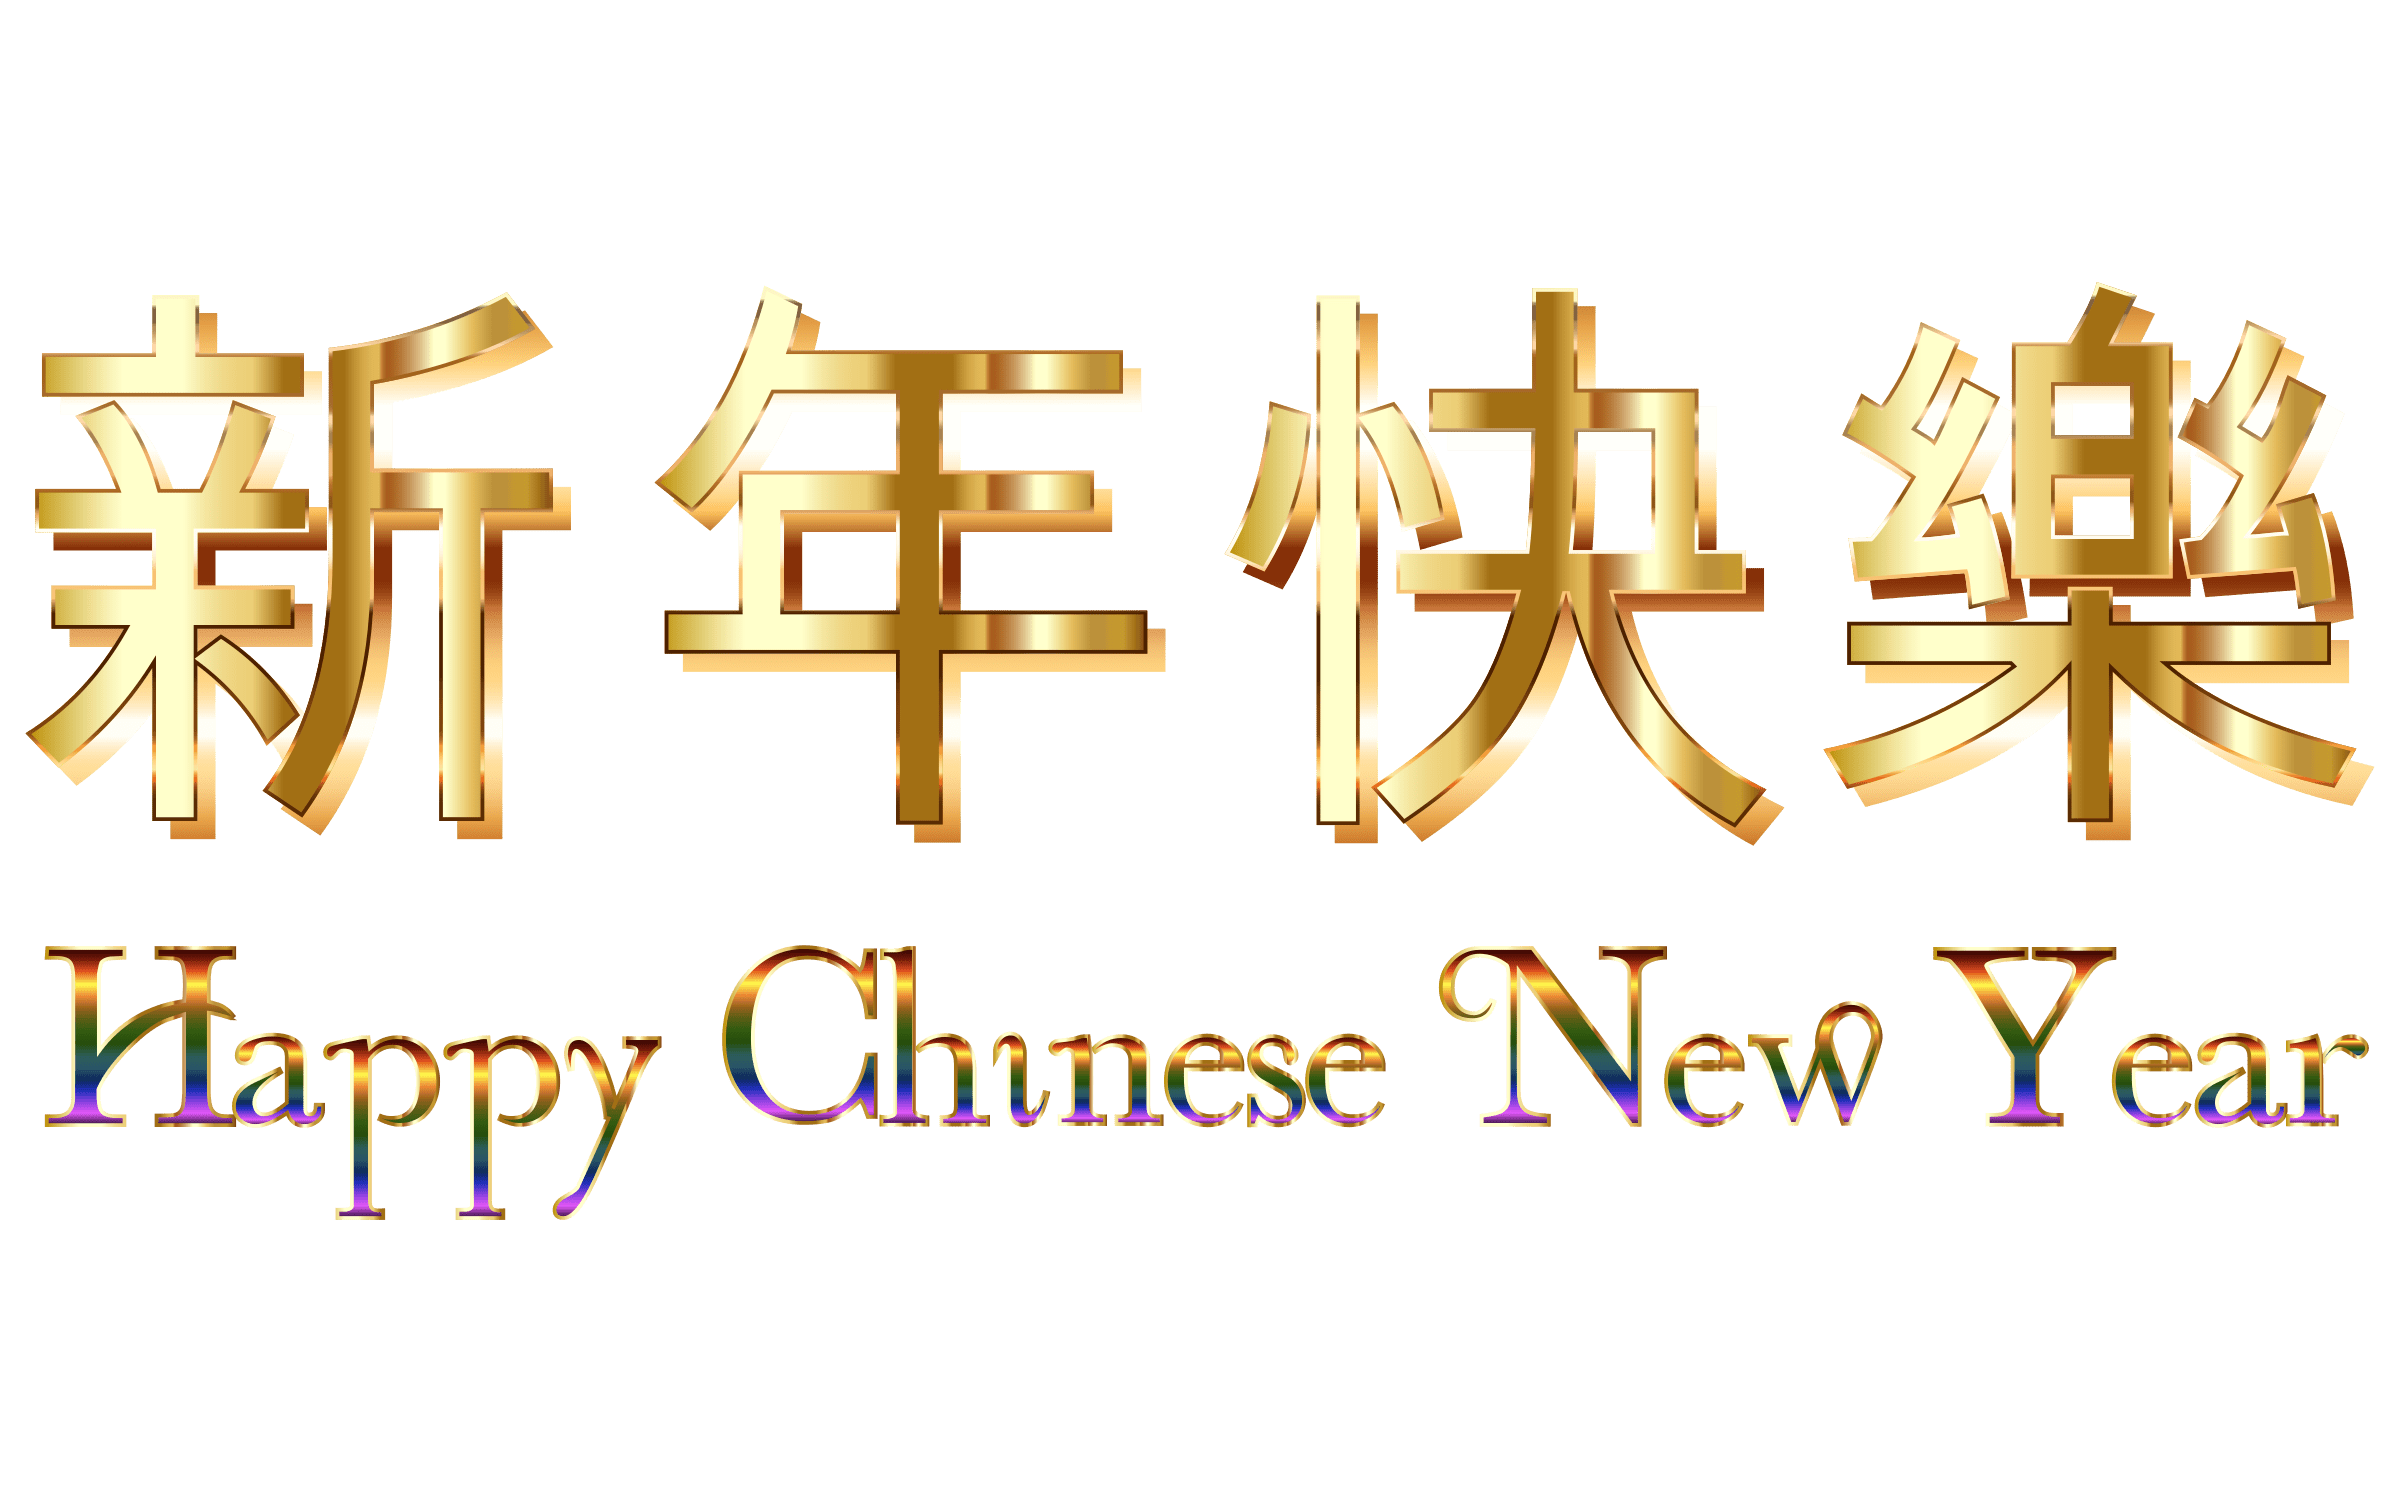 parade clipart chinese new year